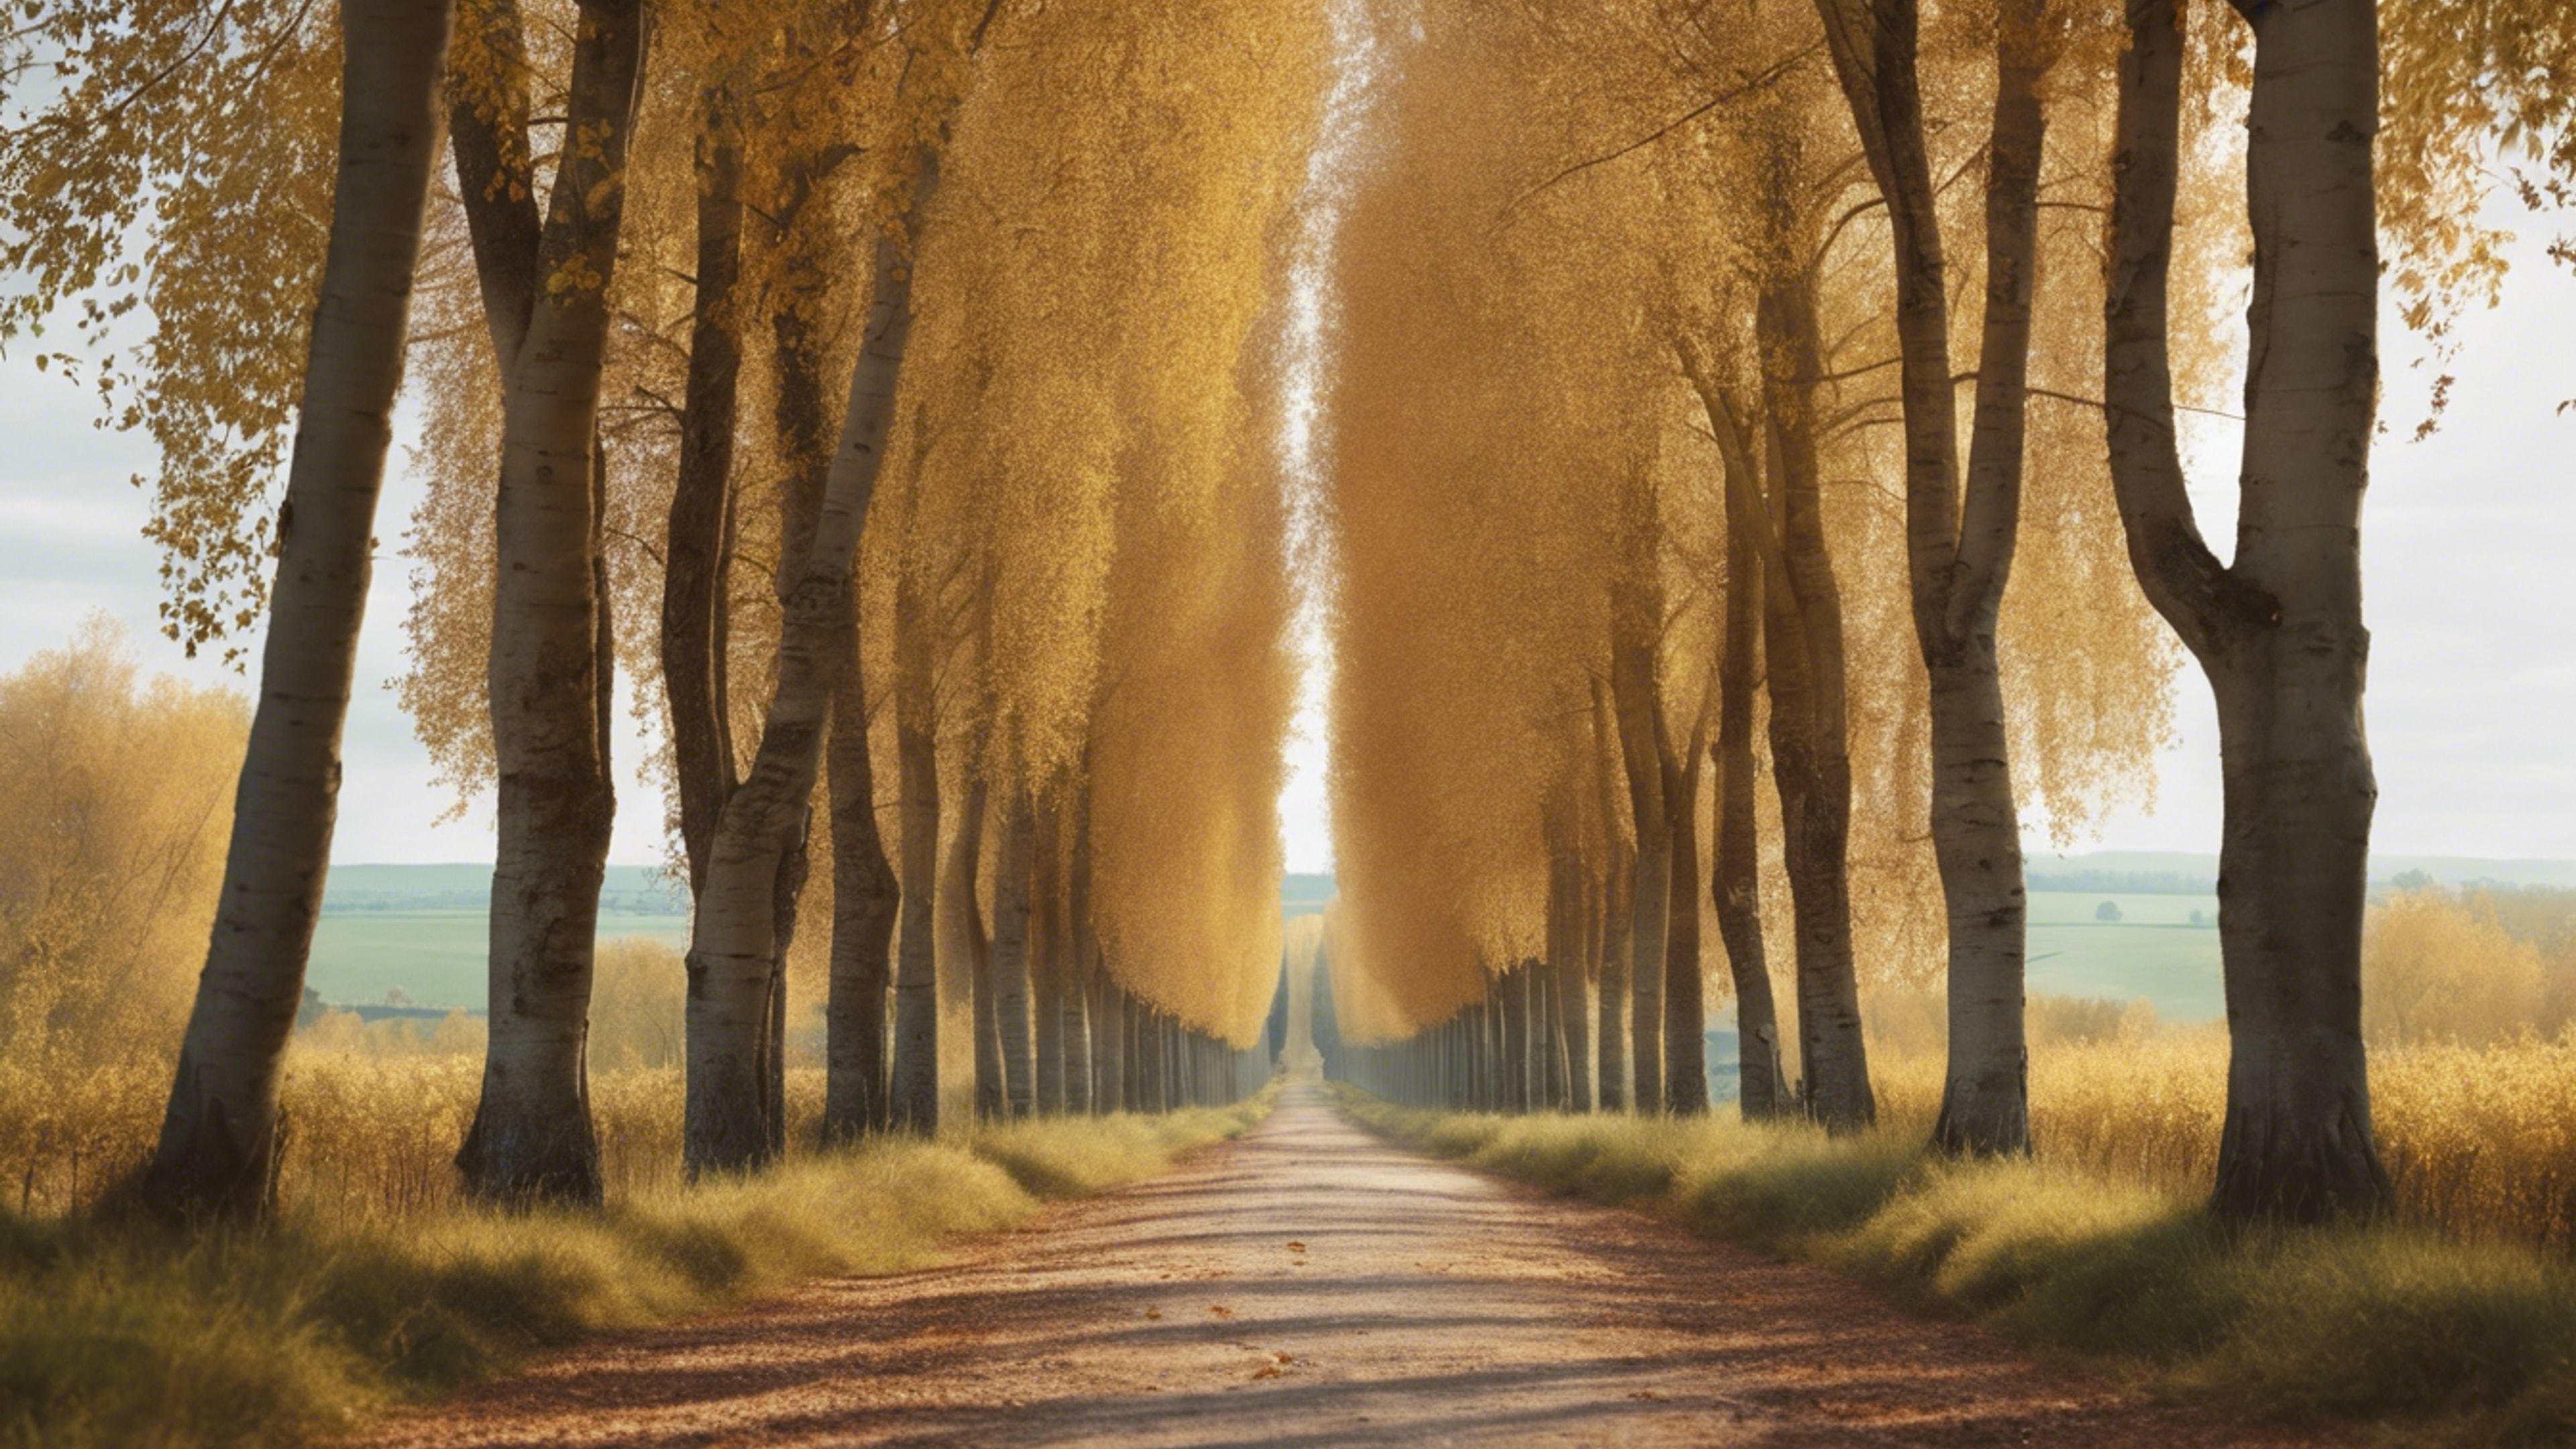 A peaceful French country lane lined with tall, mature poplar trees in autumn. 牆紙[76d1ad7093004c7494eb]